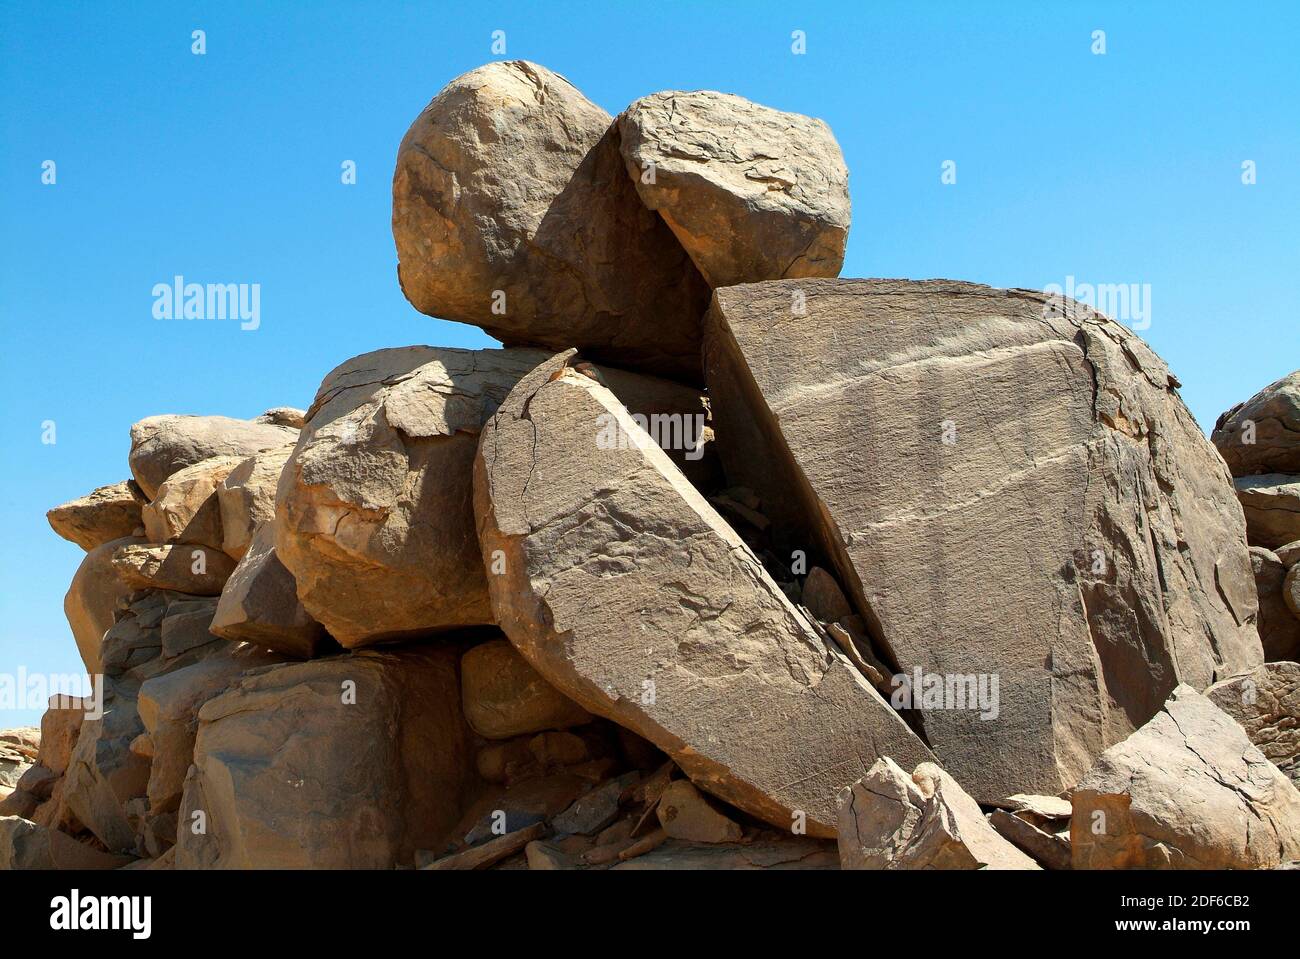 Granitic rock fragmented by thermoclasticism. Egyptian desert. Stock Photo